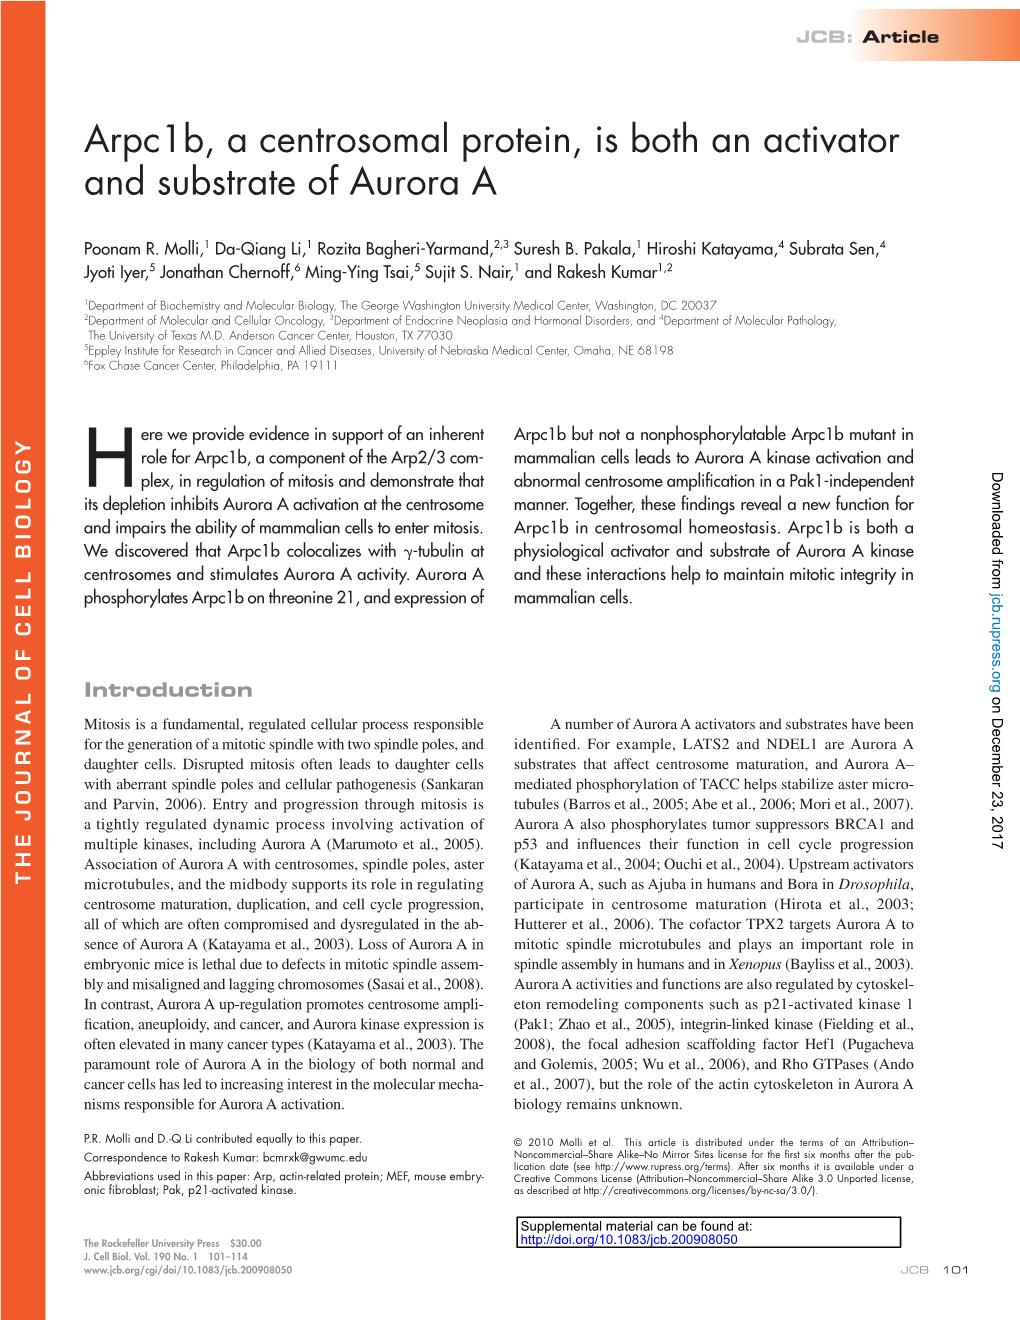 Arpc1b, a Centrosomal Protein, Is Both an Activator and Substrate of Aurora A